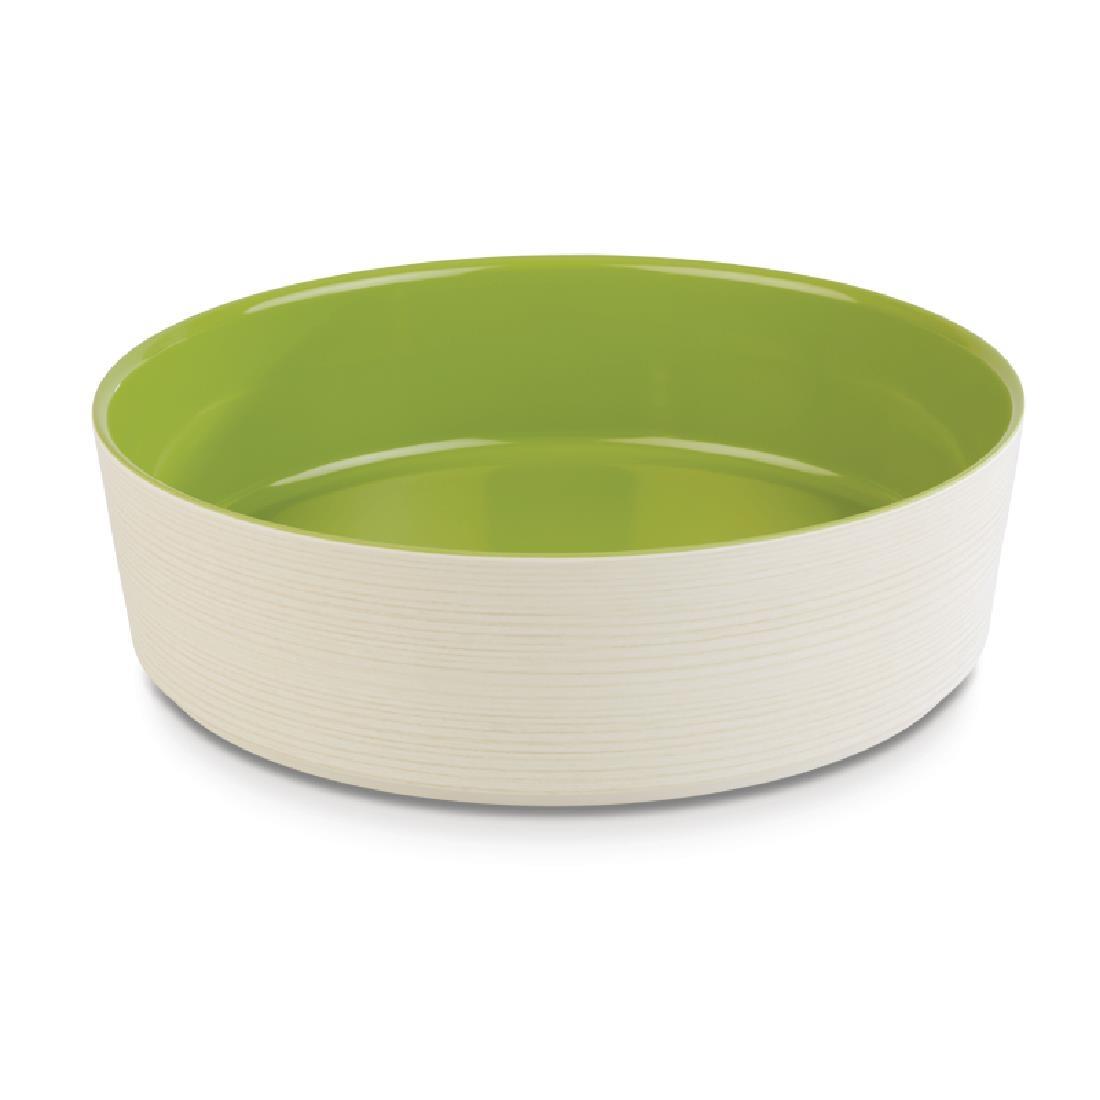 APS+ Melamine Round Bowl Maple and Green 4 Ltr - DE568  - 1